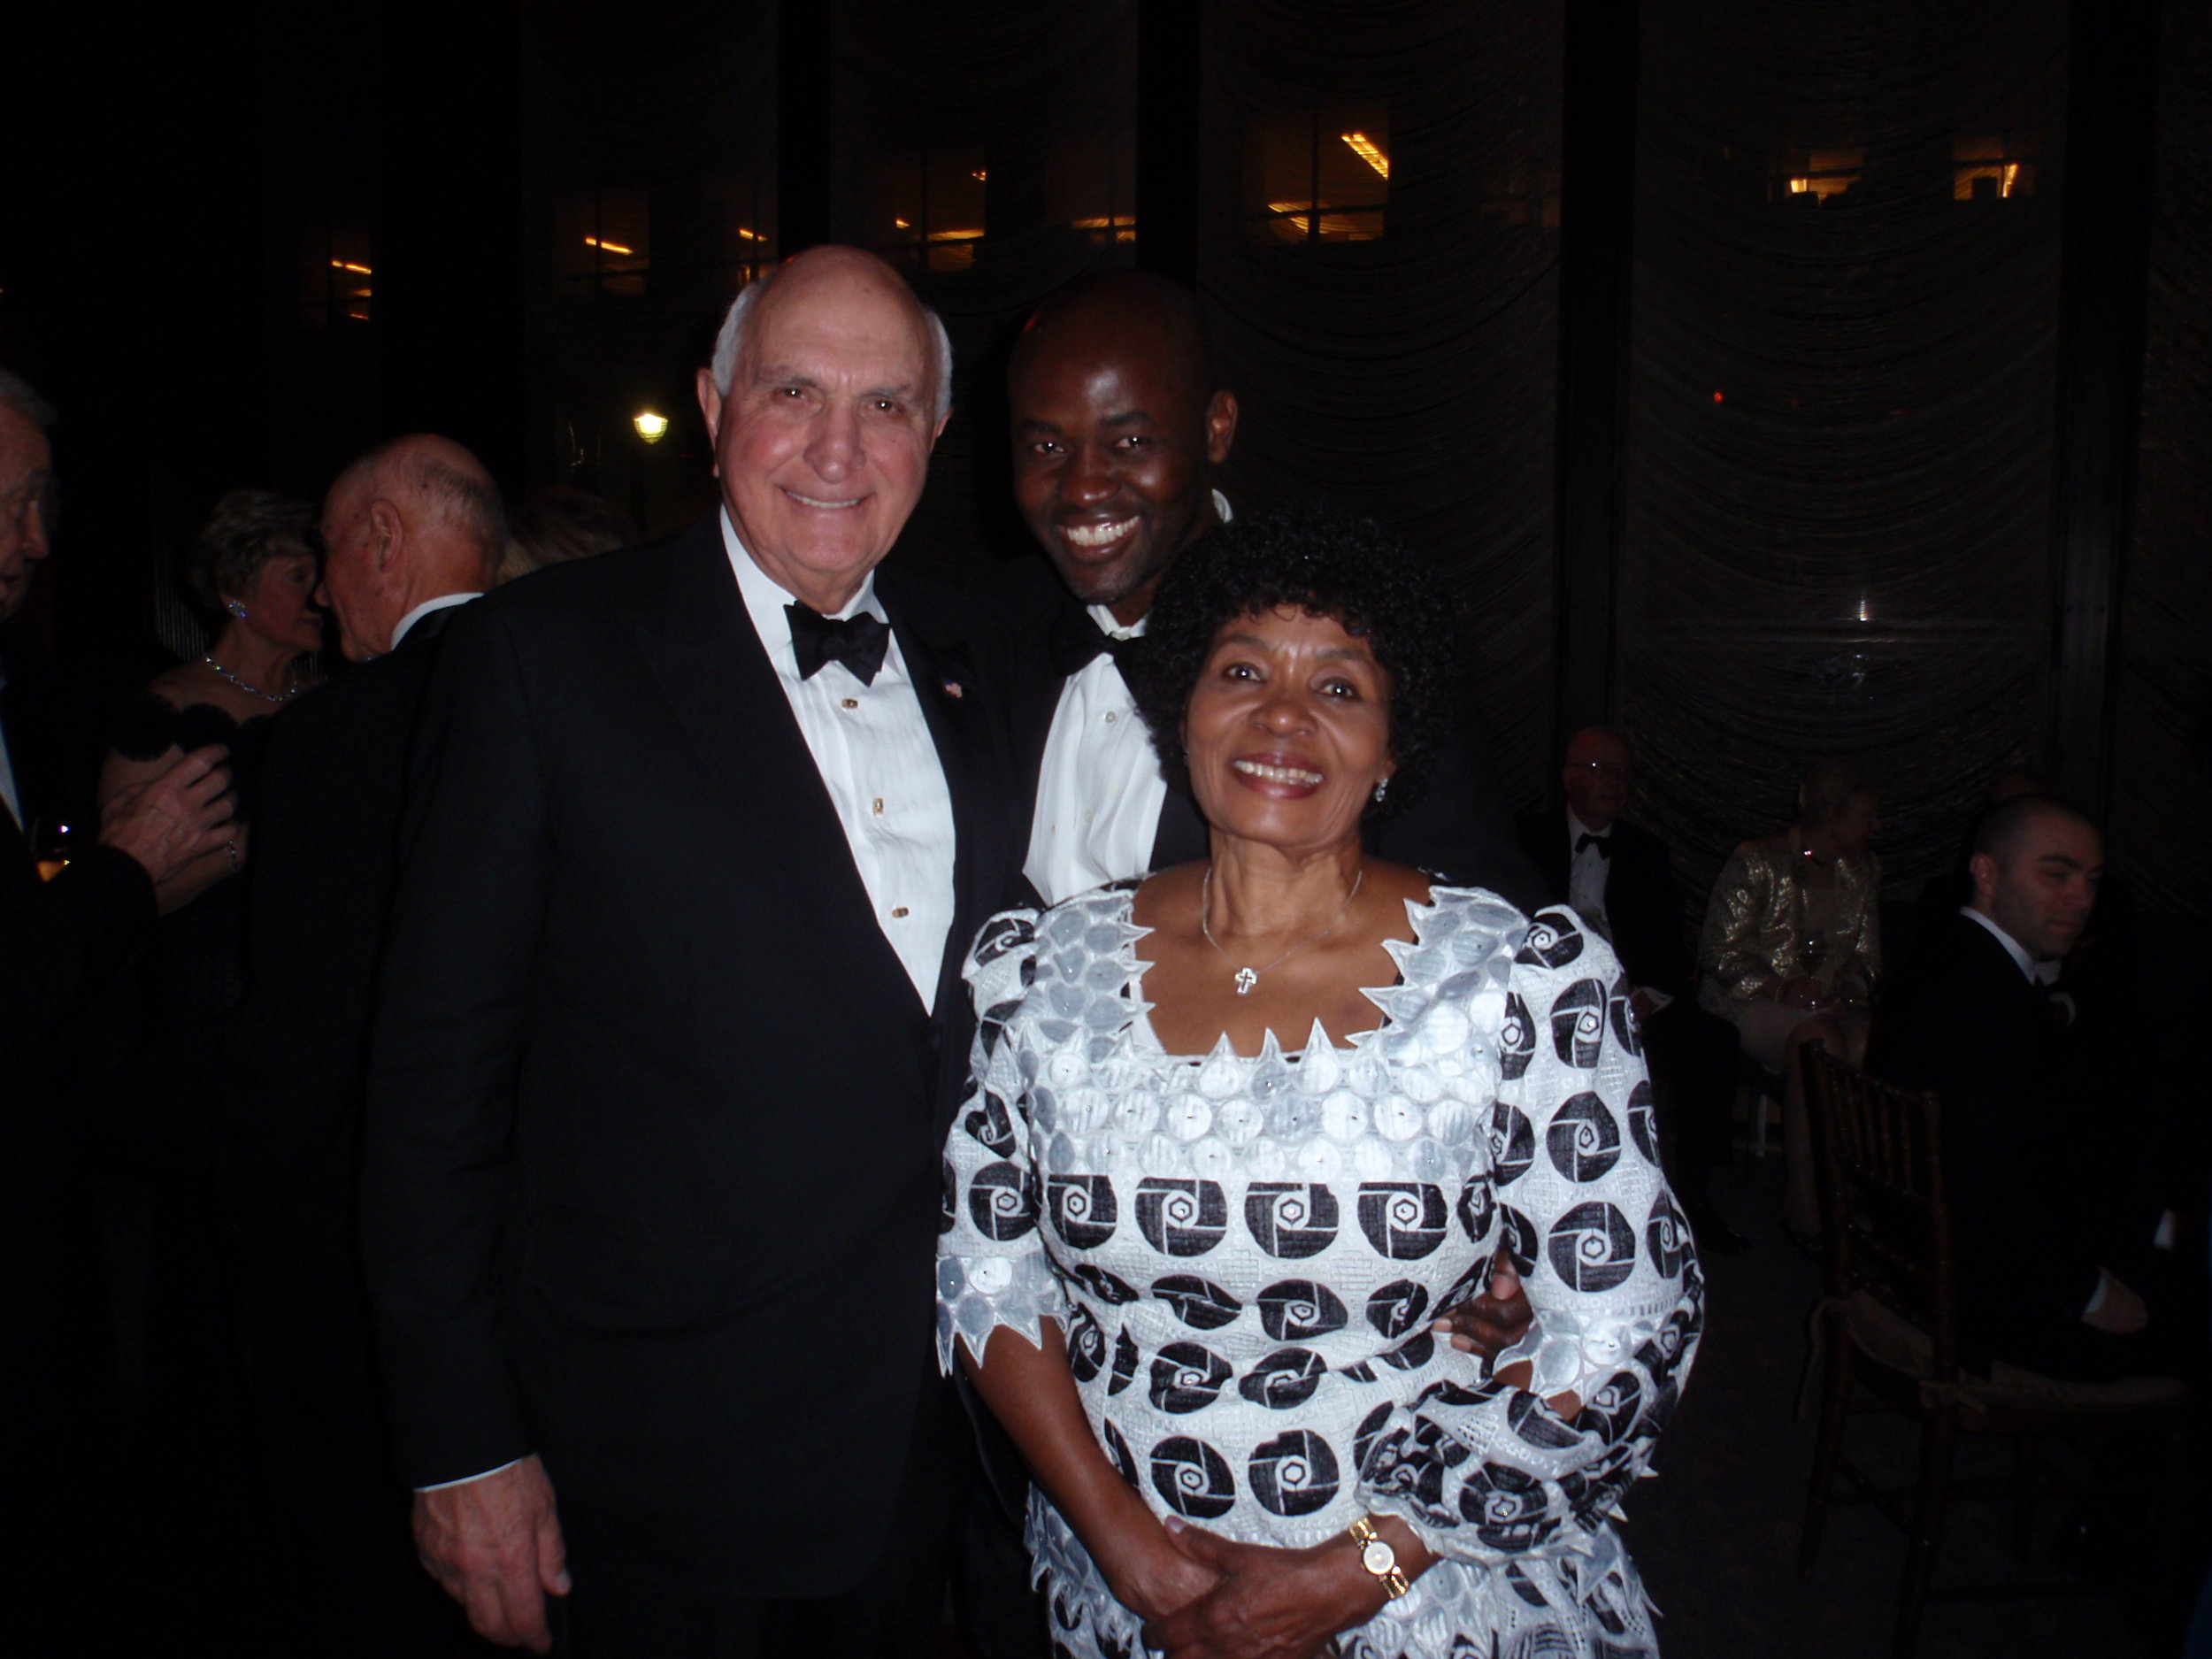   At the wedding reception, I introduced my mom to    Ken Langone, the down-to-earth billionaire who co-founded Home Depot   .    